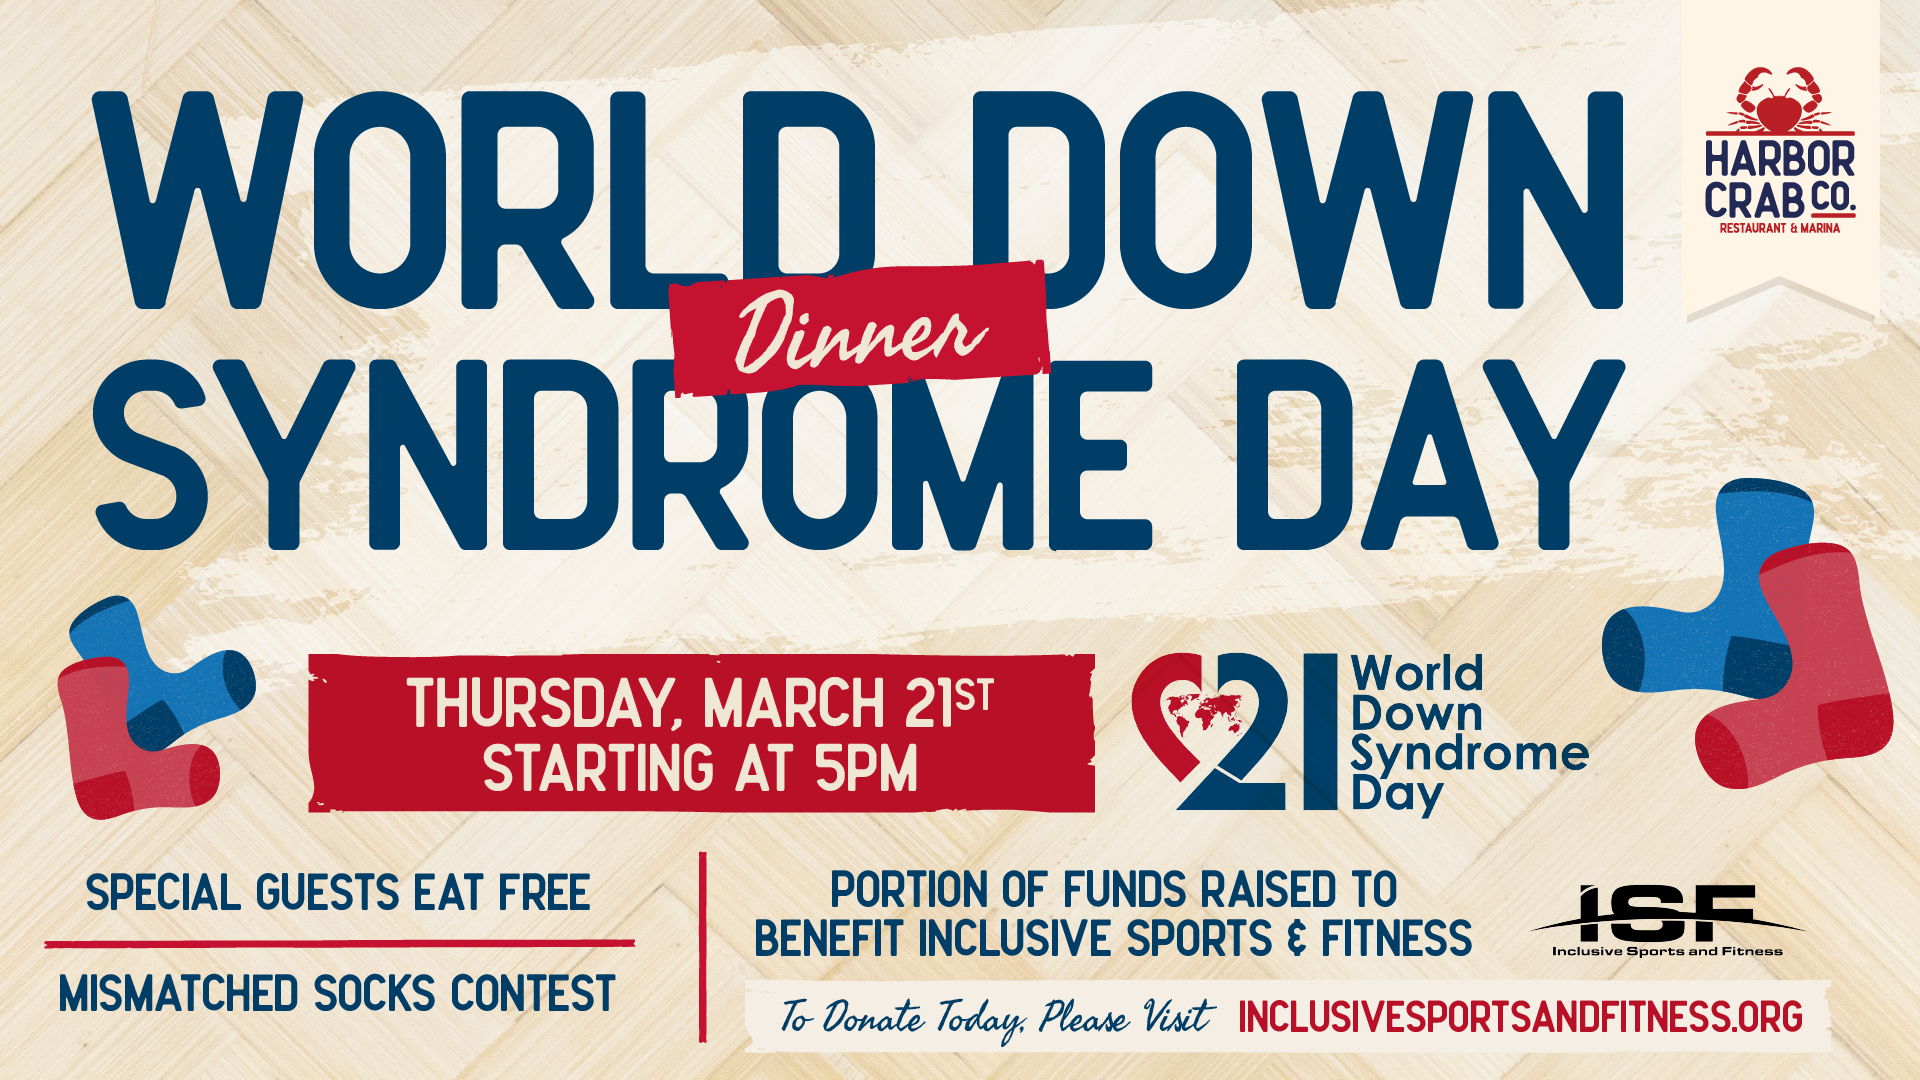 A promotional banner for World Down Syndrome Day Dinner at Harbor Crab Co., highlighting special offers, a socks contest, and a charity fundraiser.